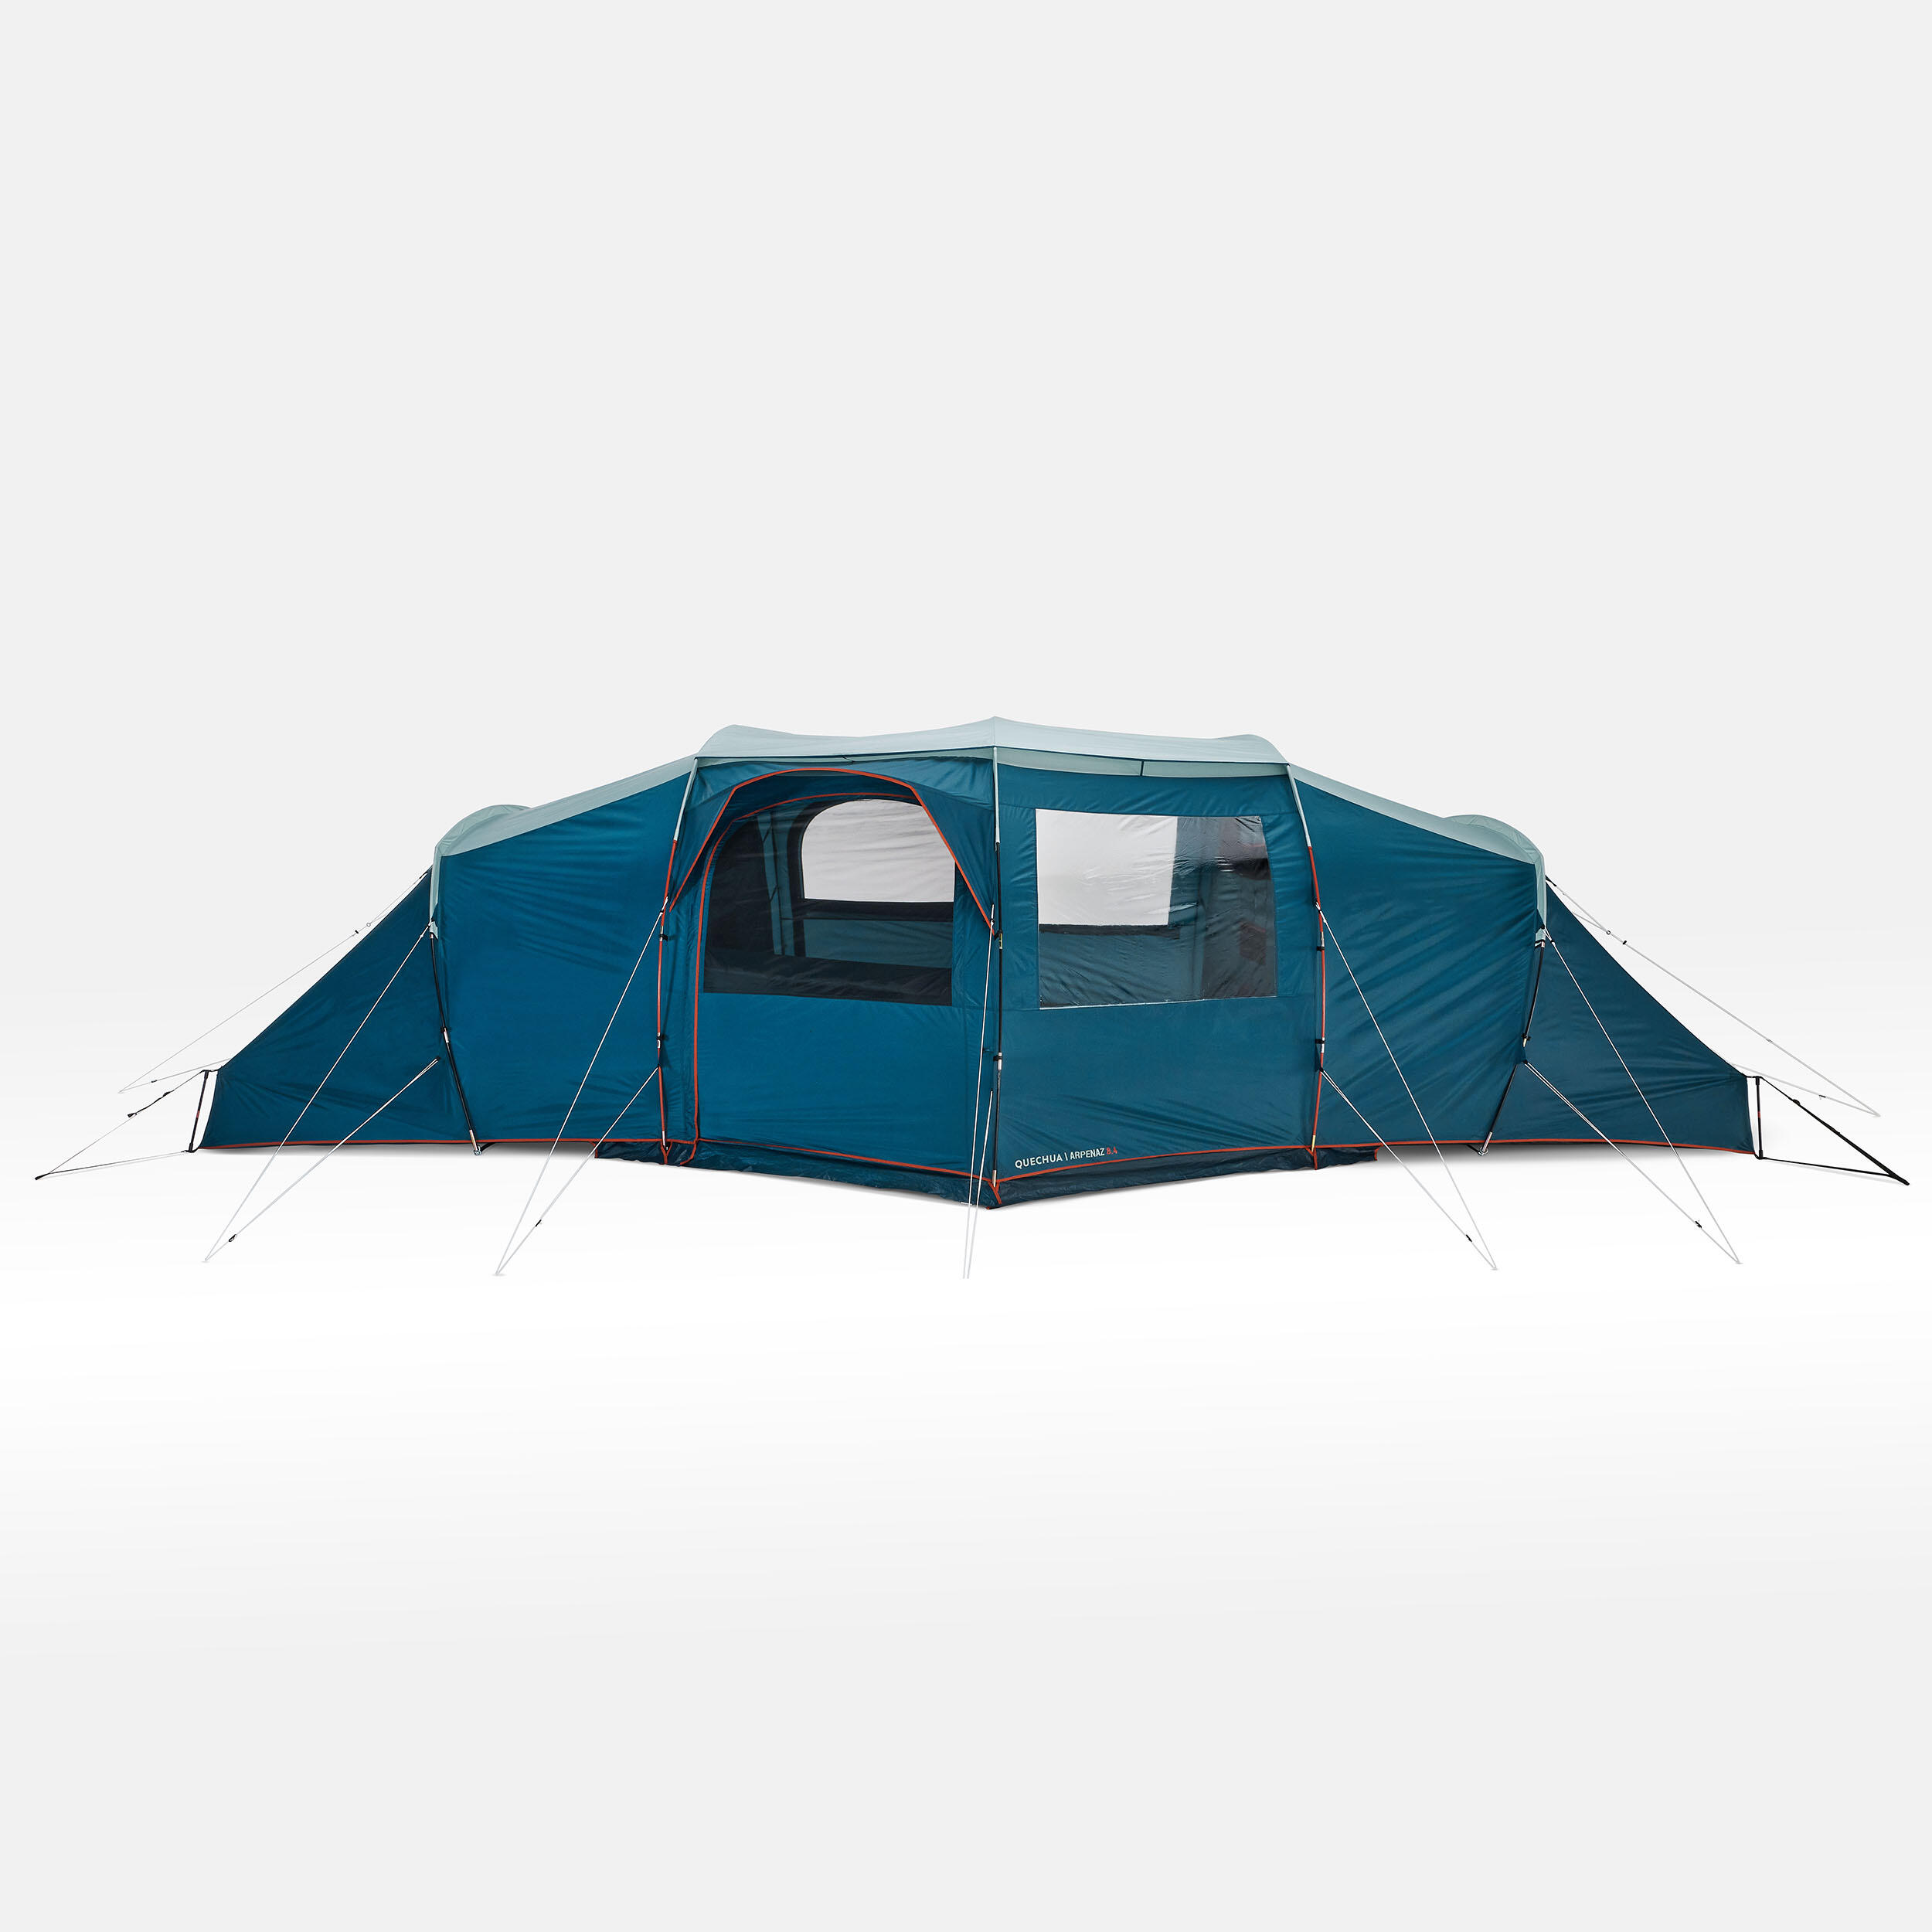 Camping tent with poles - Arpenaz 8.4 - 8 Person - 4 Bedrooms 10/31